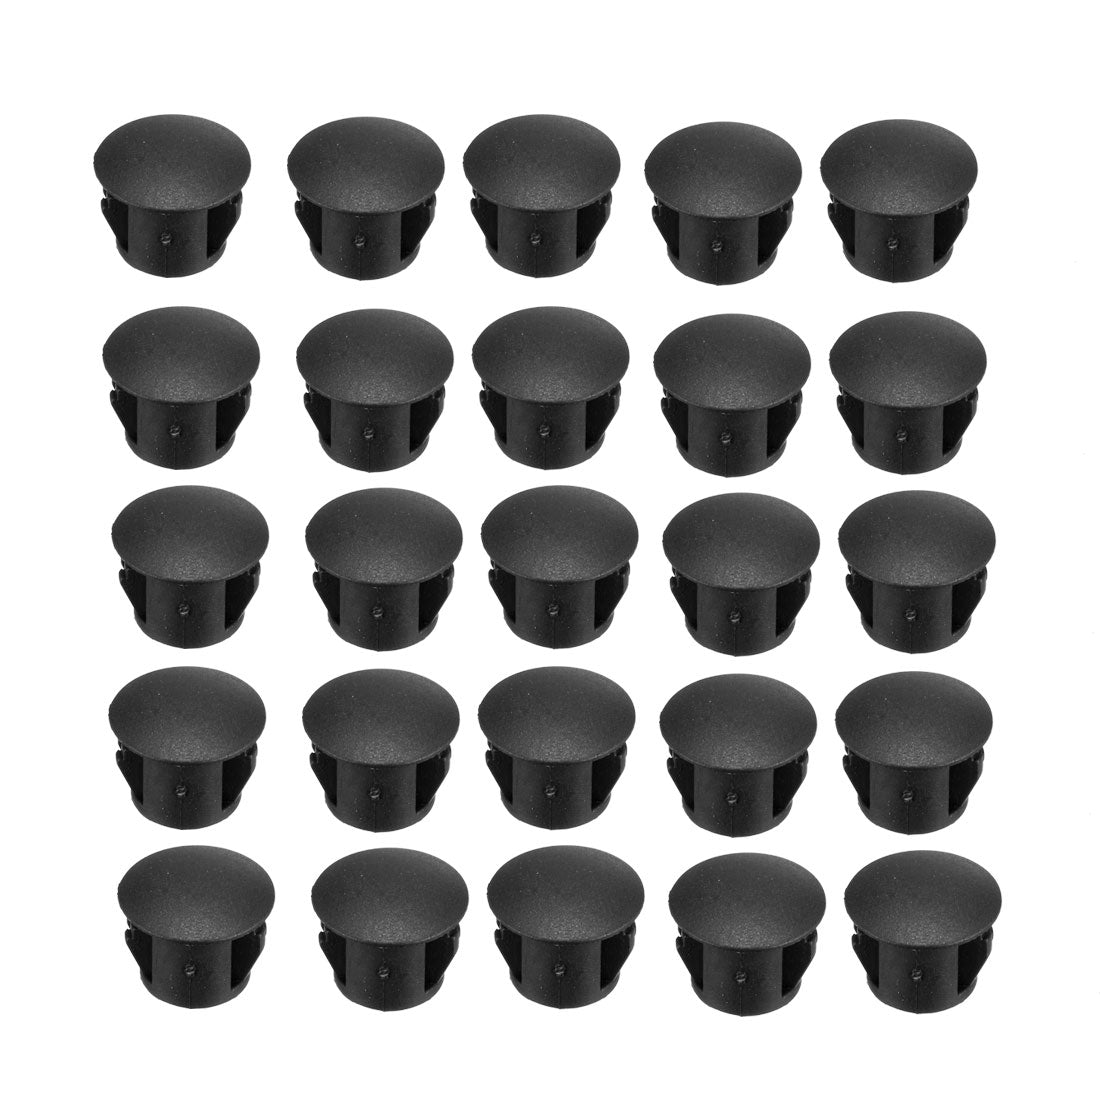 uxcell Uxcell 45pcs Plastic 10mm Dia Snap in Type Locking Hole Connectors Button Cover